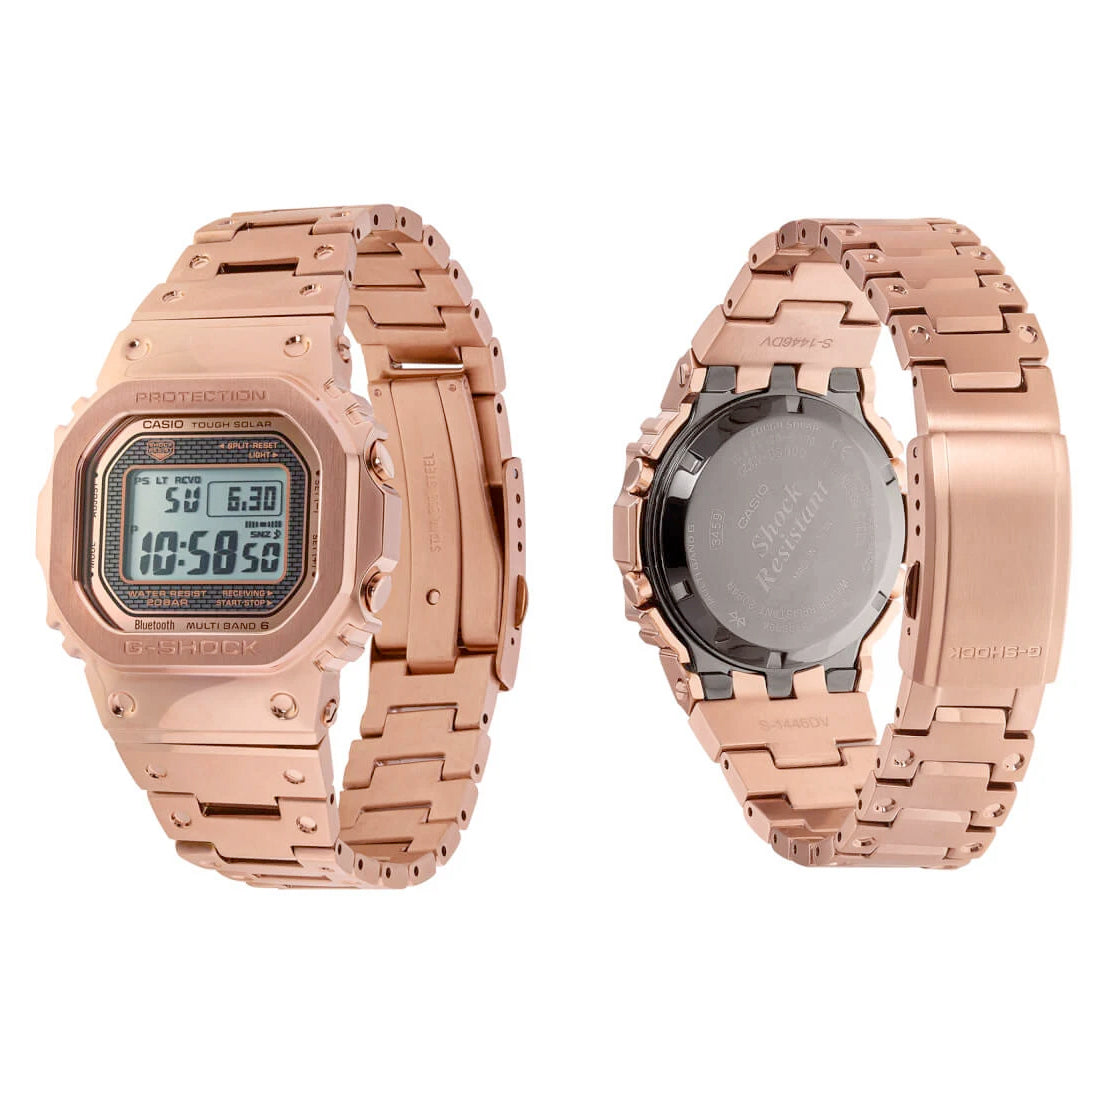 CASIO G-SHOCK GMWB5000GD-4 Rose Gold Bluetooth Full Metal Solar Square  Watch Pink